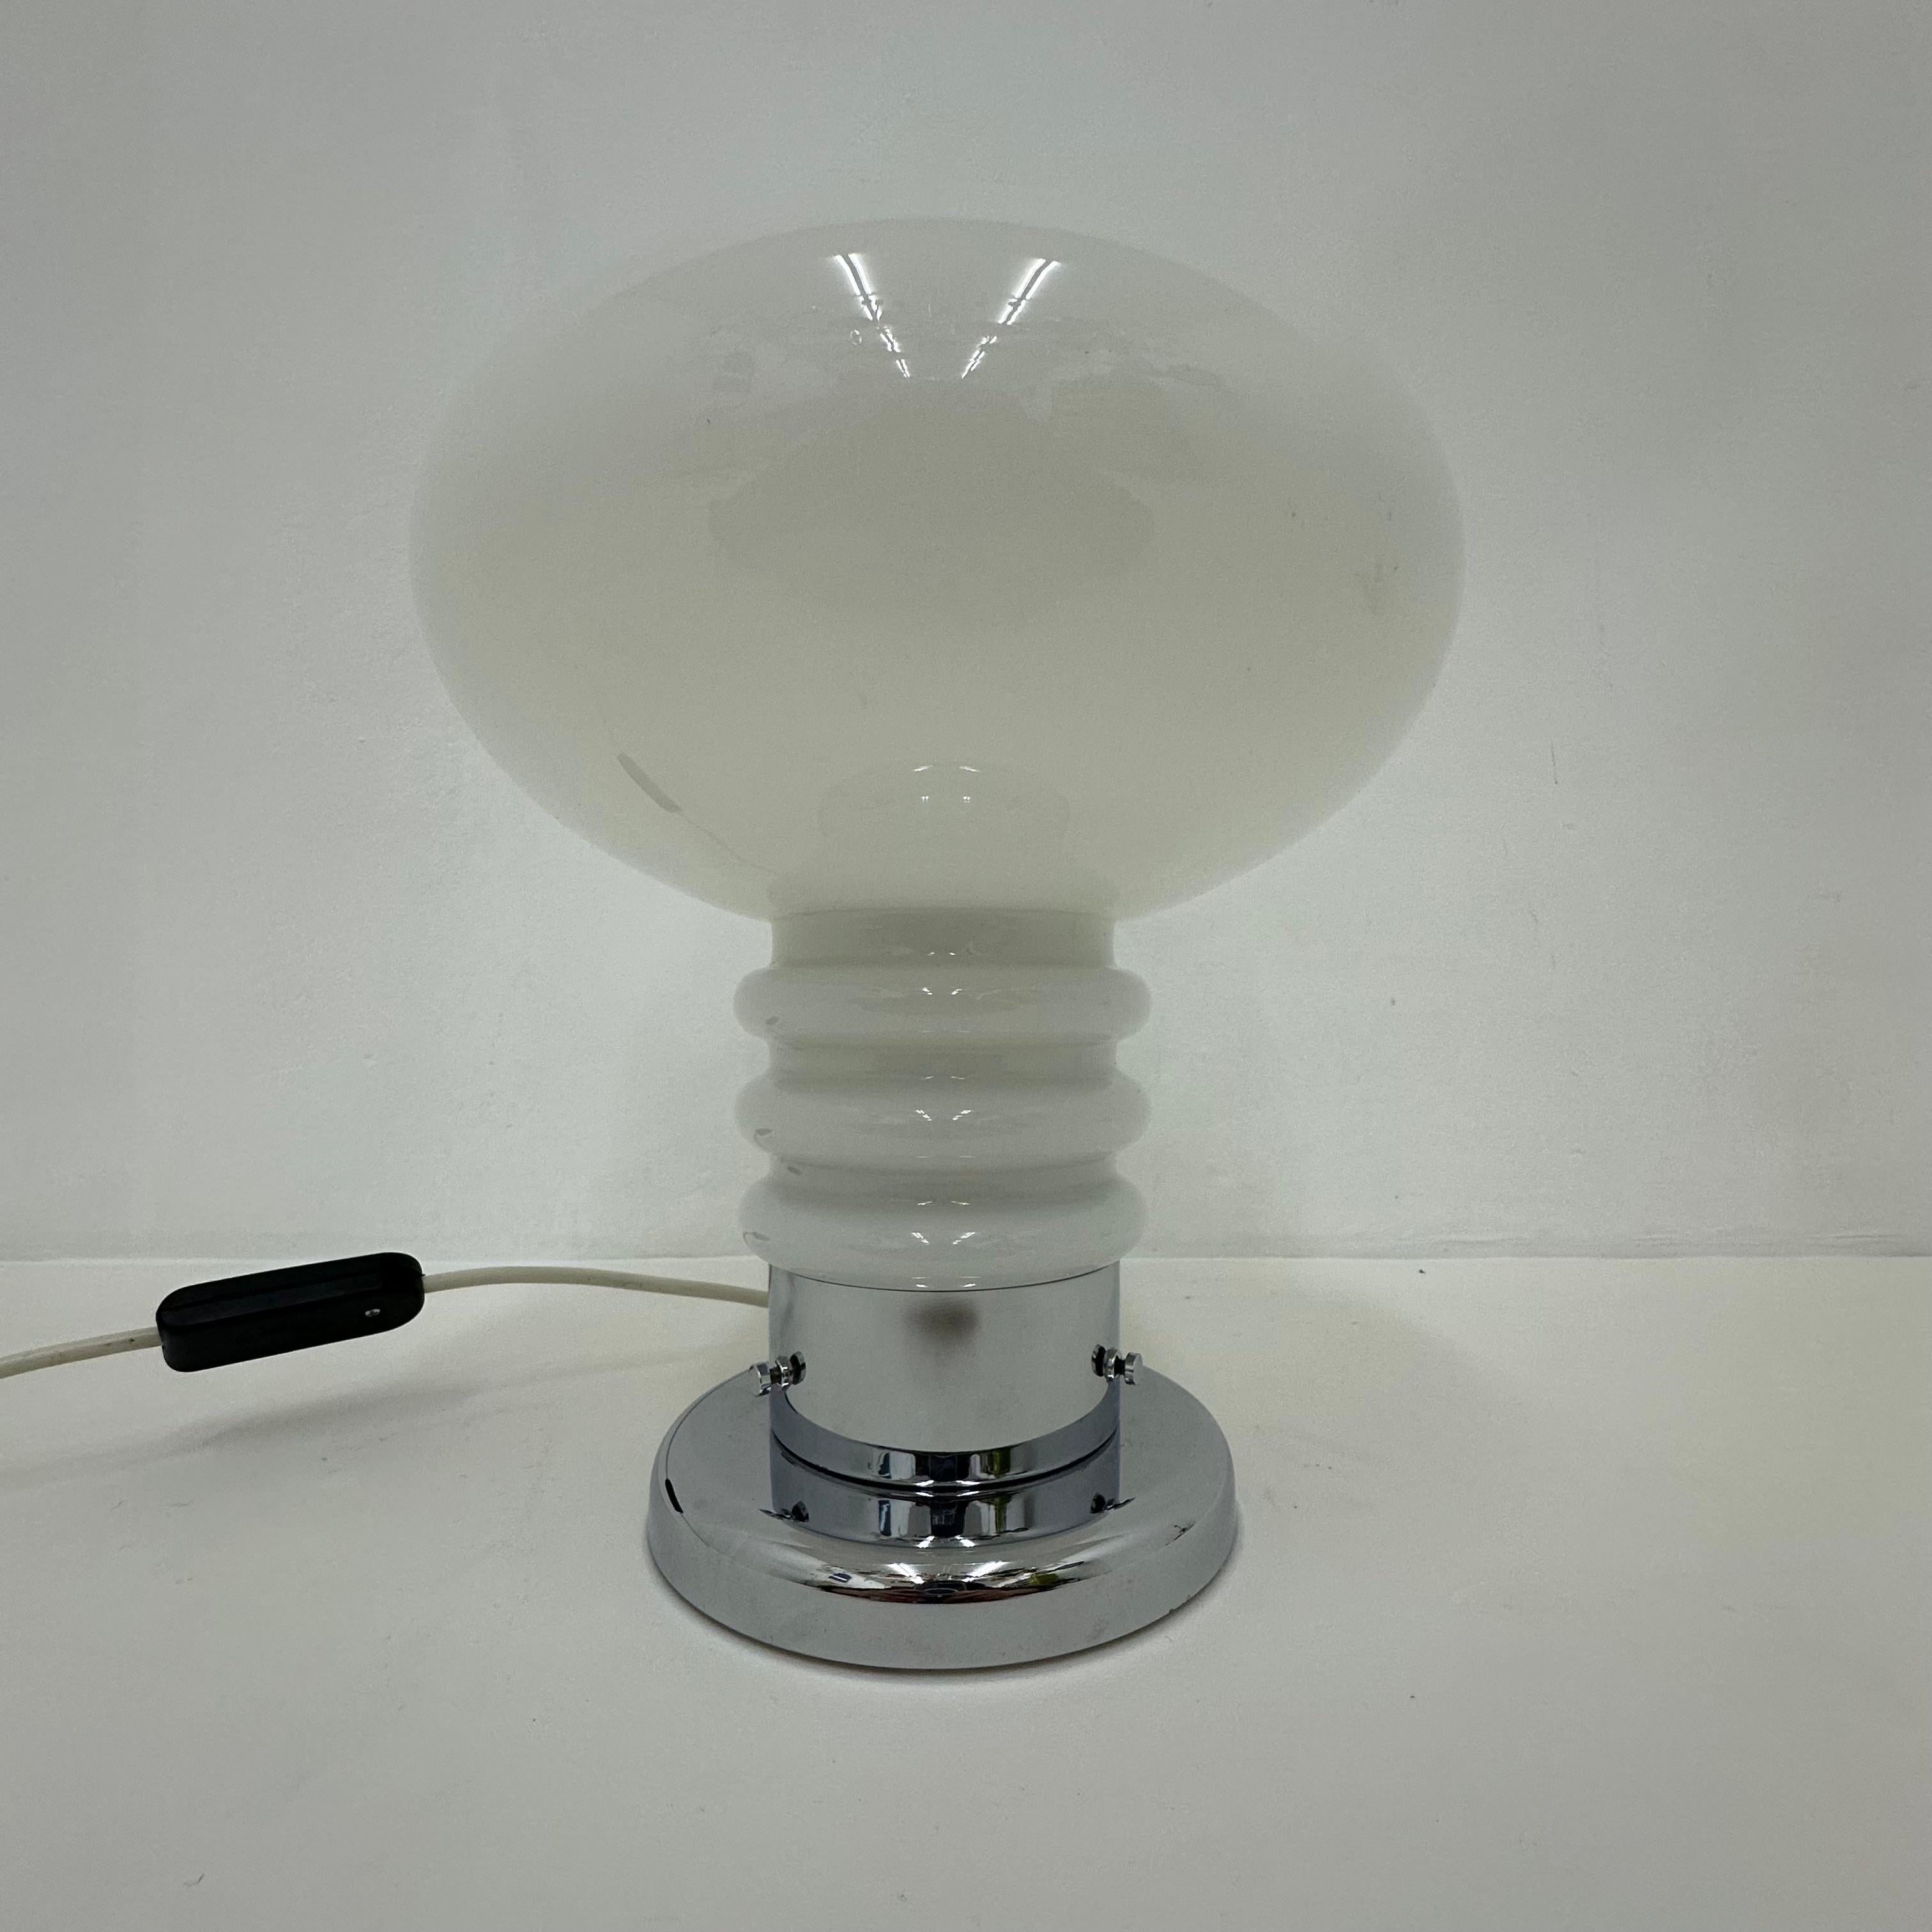 Vintage space age table lamp opaline and chrome , 1970’s

Dimensions: 32 cmH, 23cm Diameter
Material: Glass , metal
Color: White , silver

